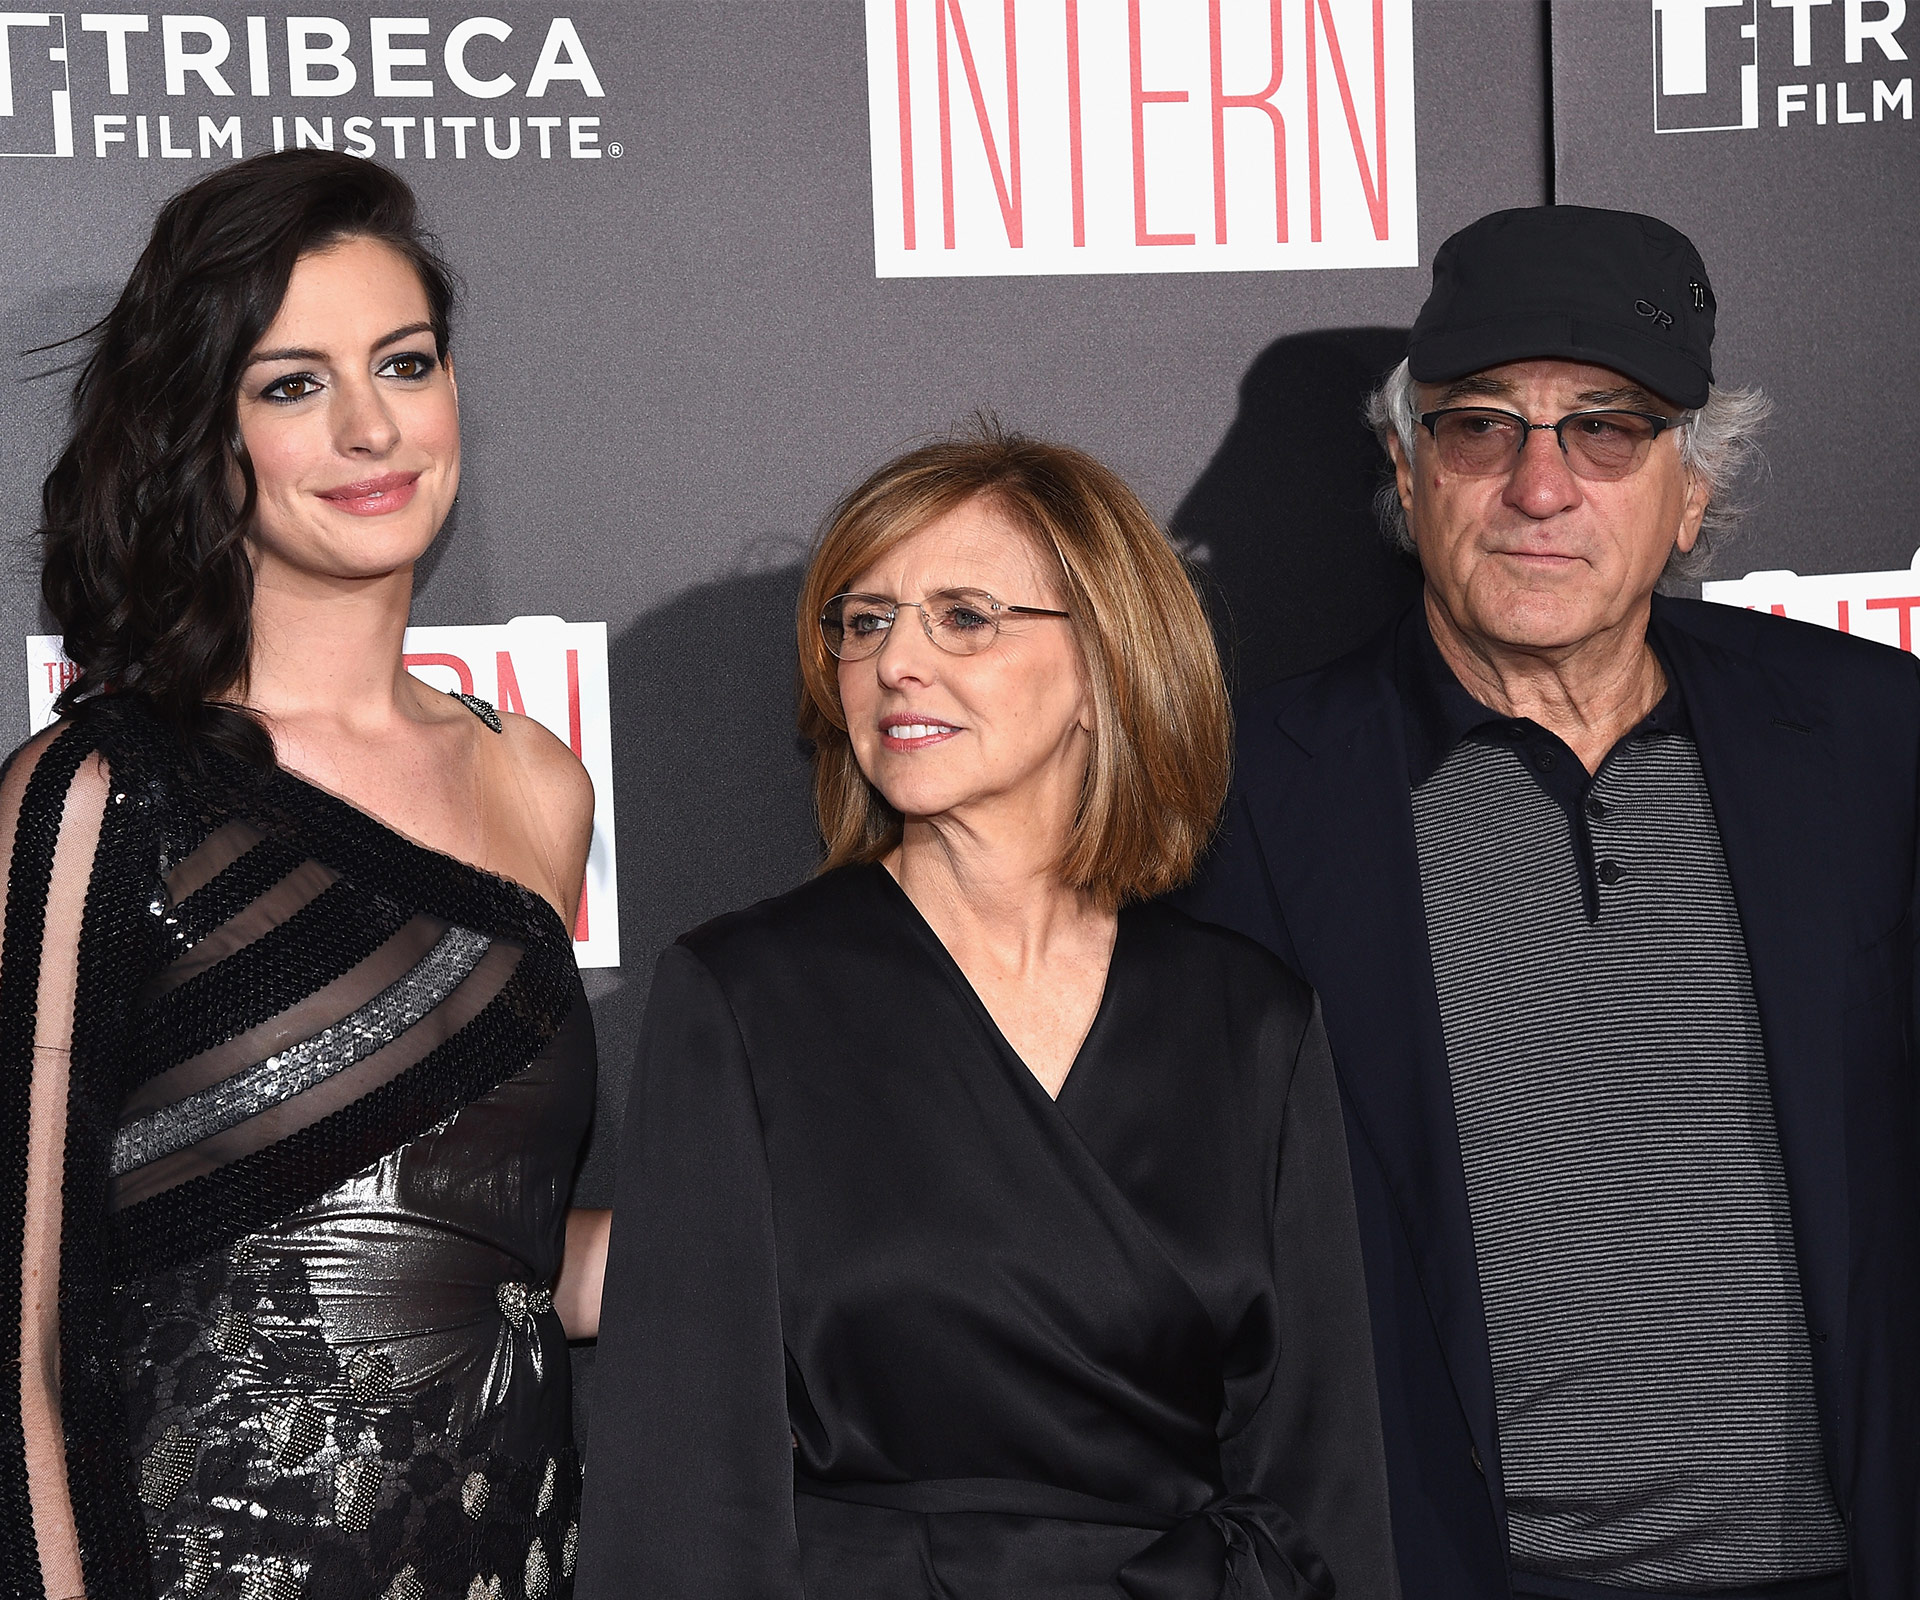 Anne Hathaway’s hilarious reaction to Mariah Carey attending The Intern premiere